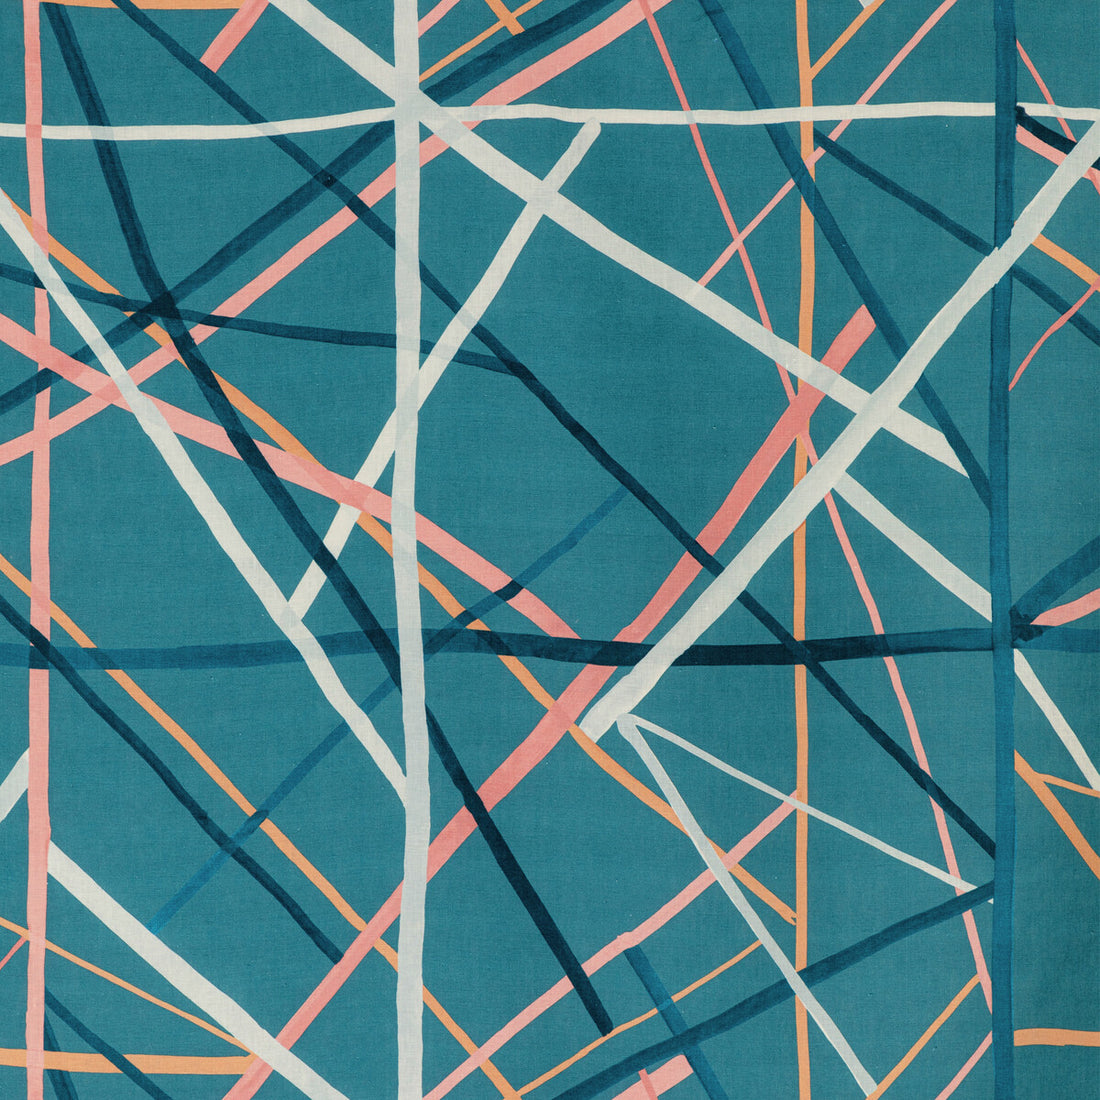 Simpatico Print fabric in teal color - pattern GWF-3771.335.0 - by Lee Jofa Modern in the Kelly Wearstler VI collection